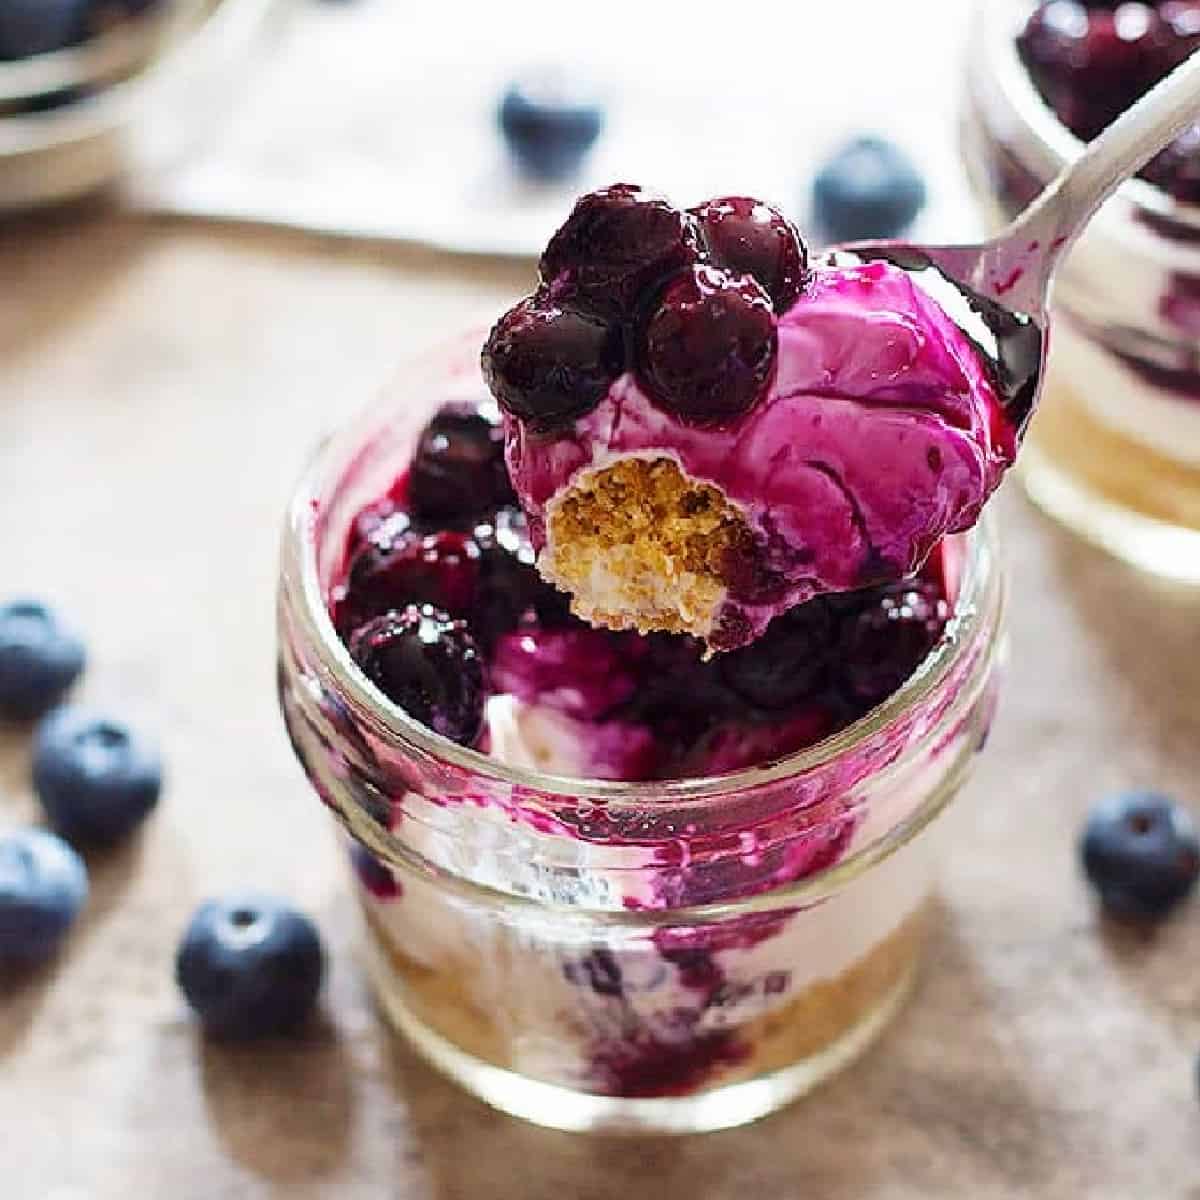 Whip up this indulgent No Bake Mini Blueberry Cheesecake in less than 30 minutes with very basic ingredients! It's creamy, velvety and will make you super happy!
